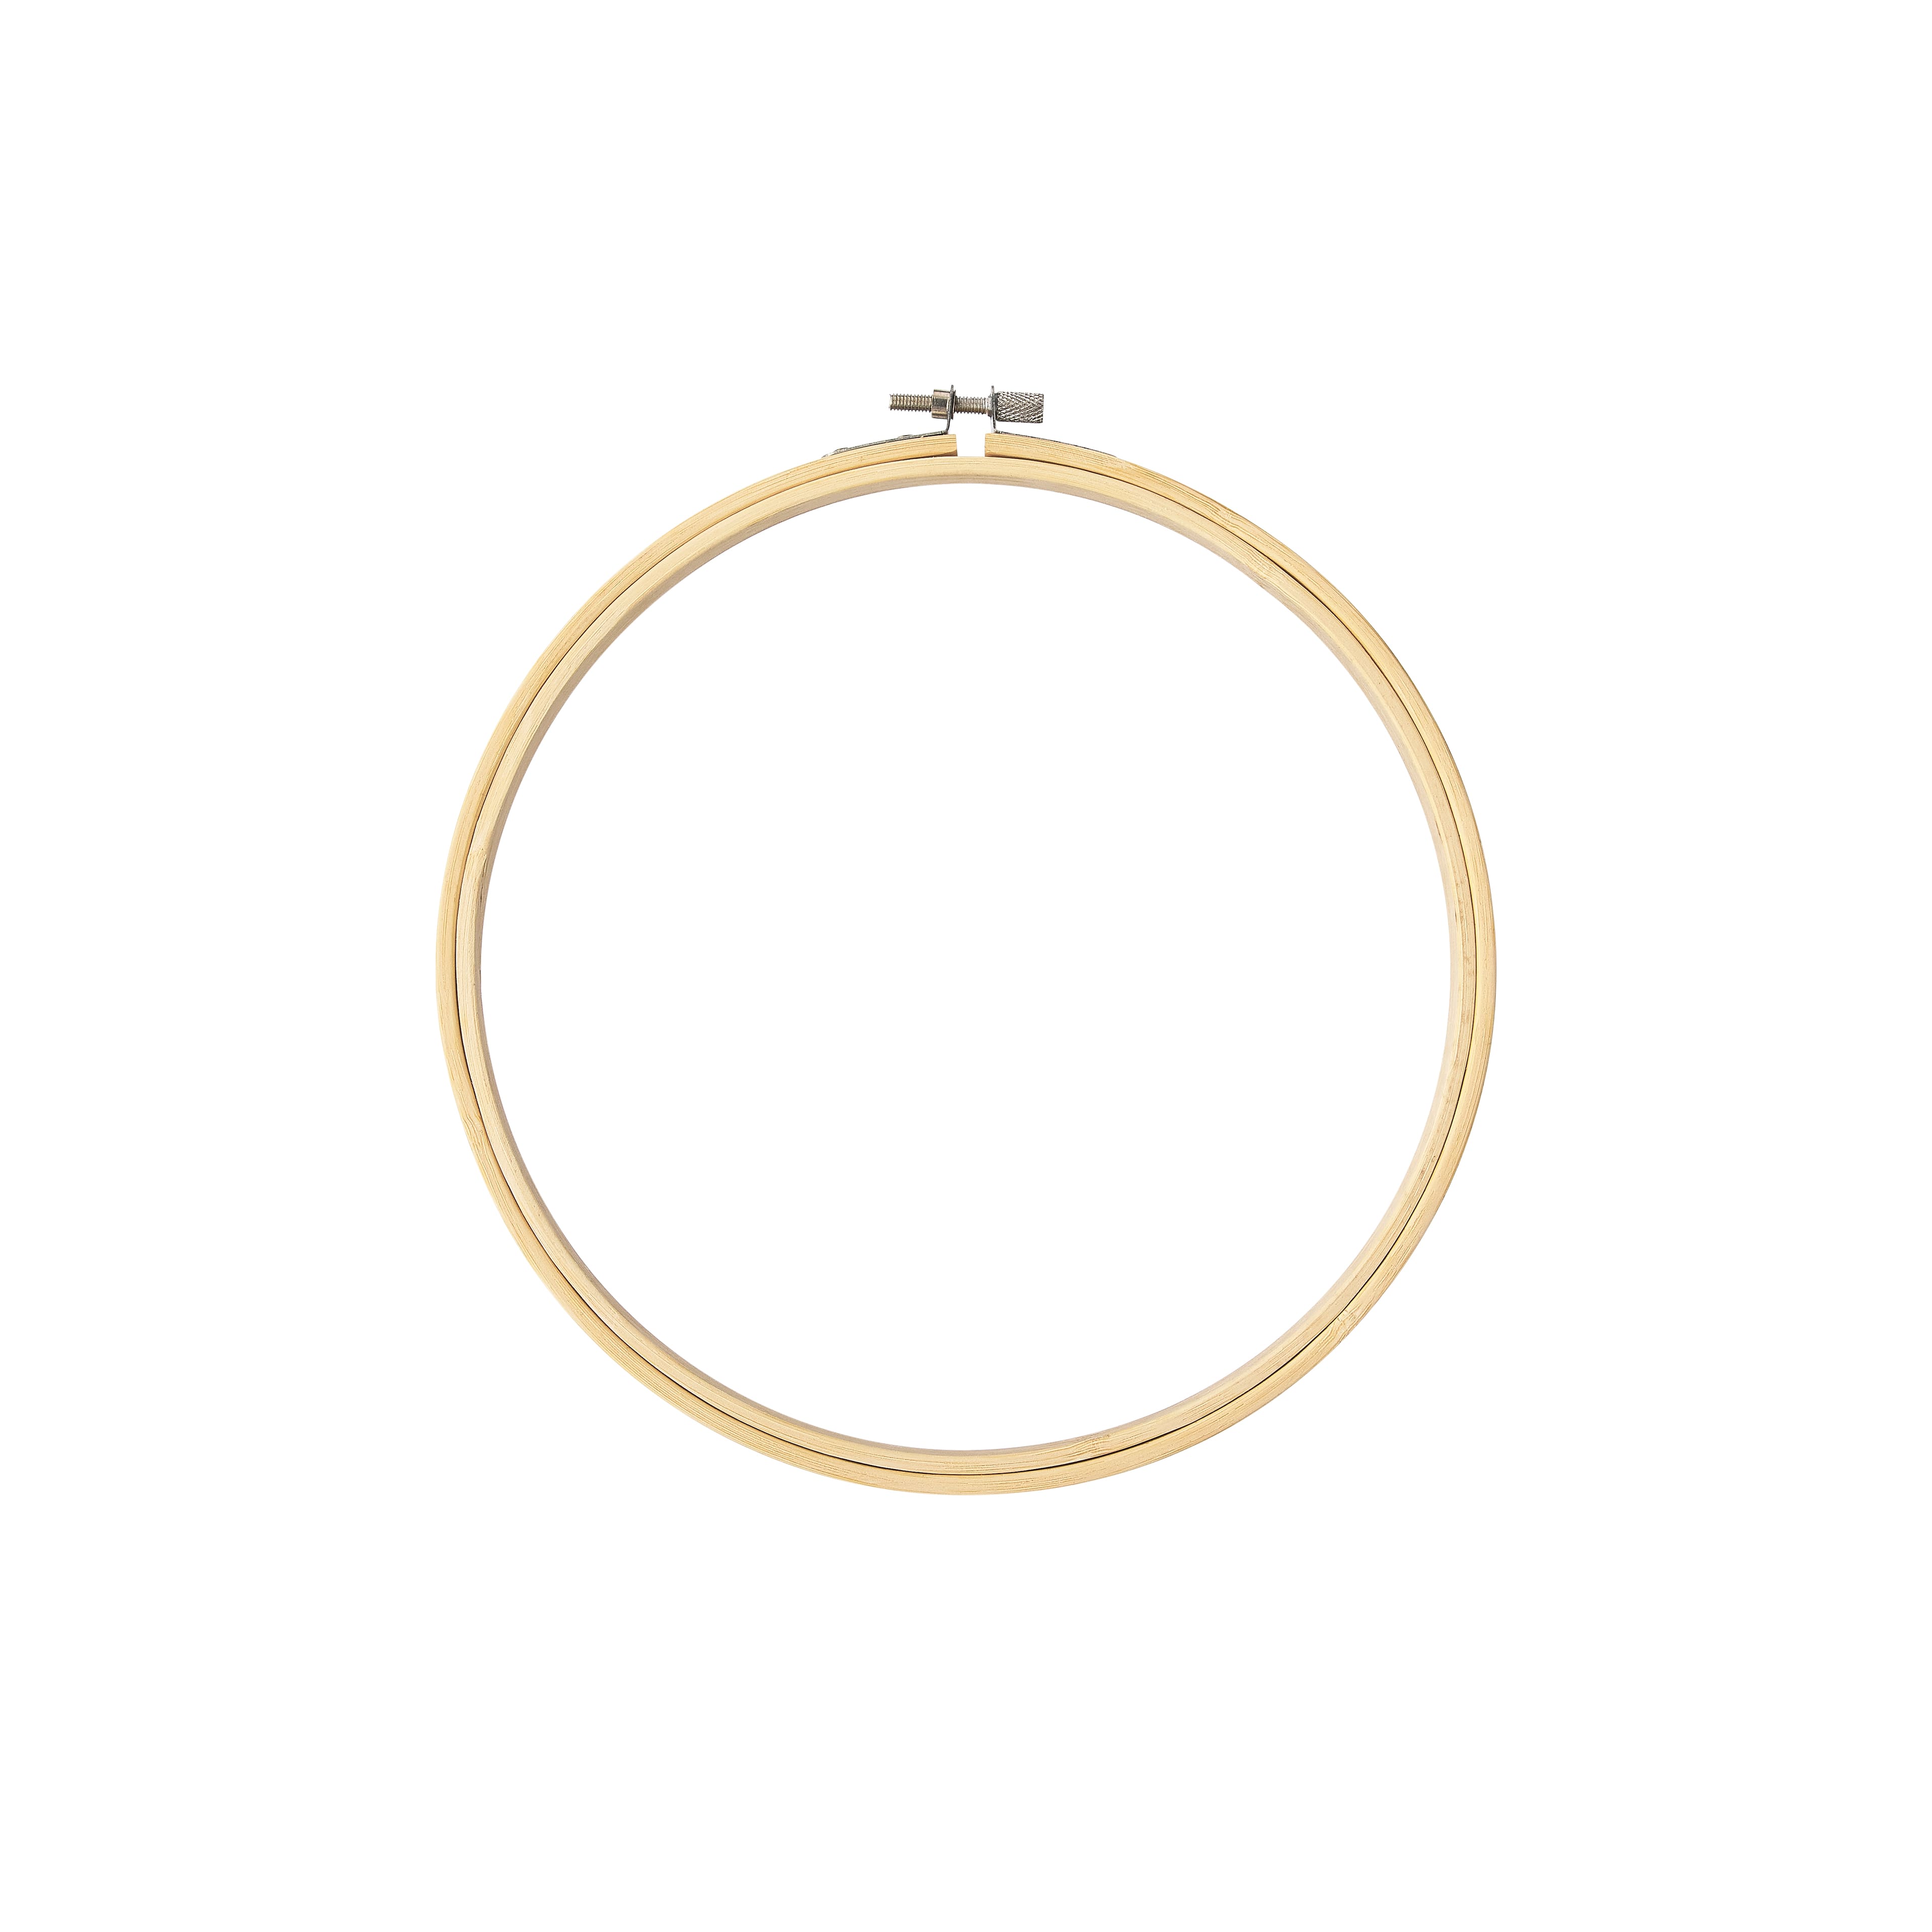 Loops & Threads™ Wooden Embroidery Hoop | Michaels